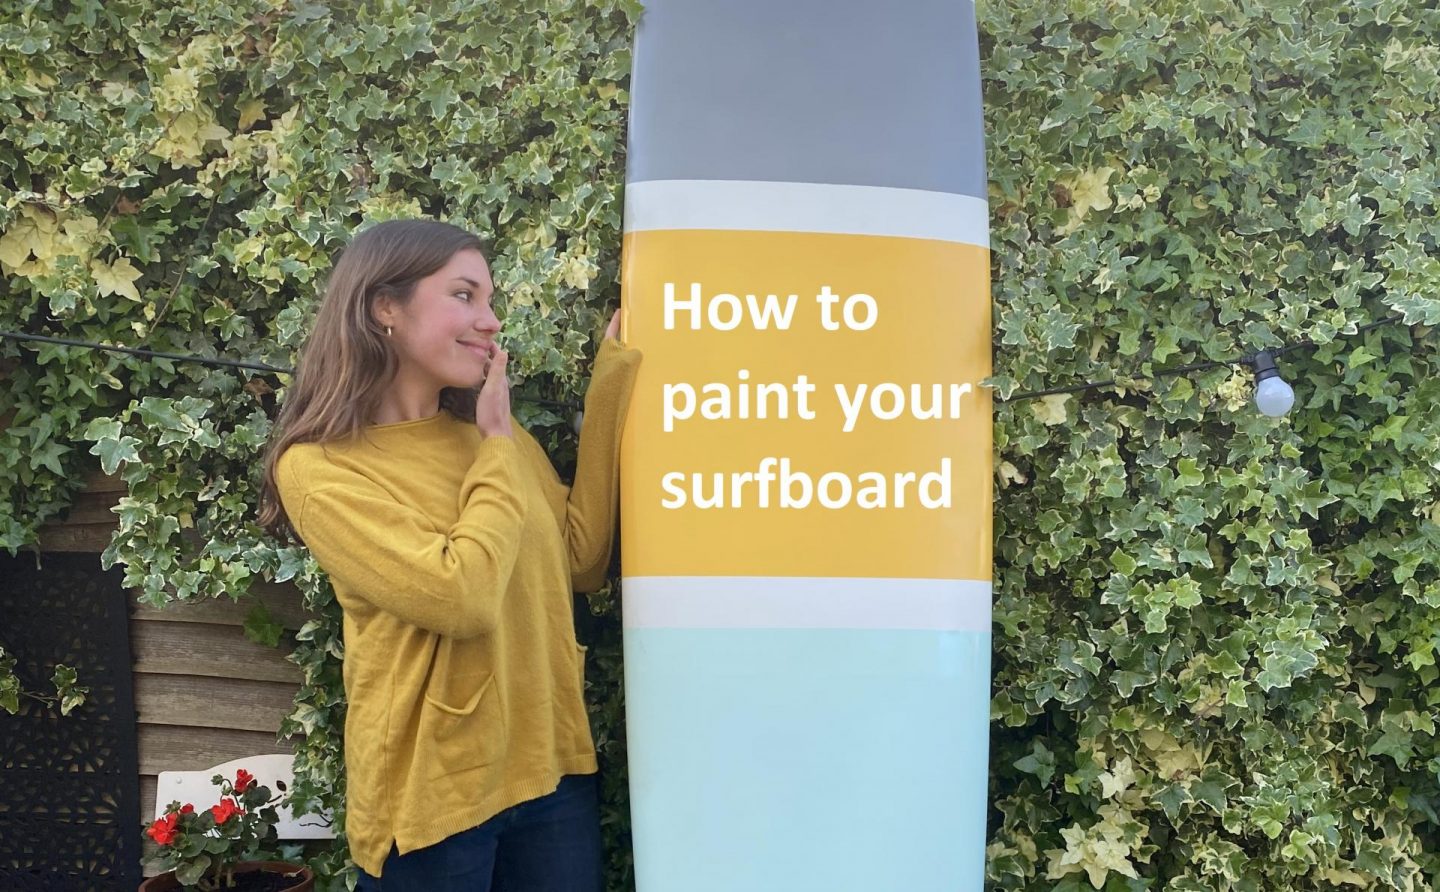 Video: How to spray paint a surfboard | Tutorial by Sian Lewis The Girl Outdoors